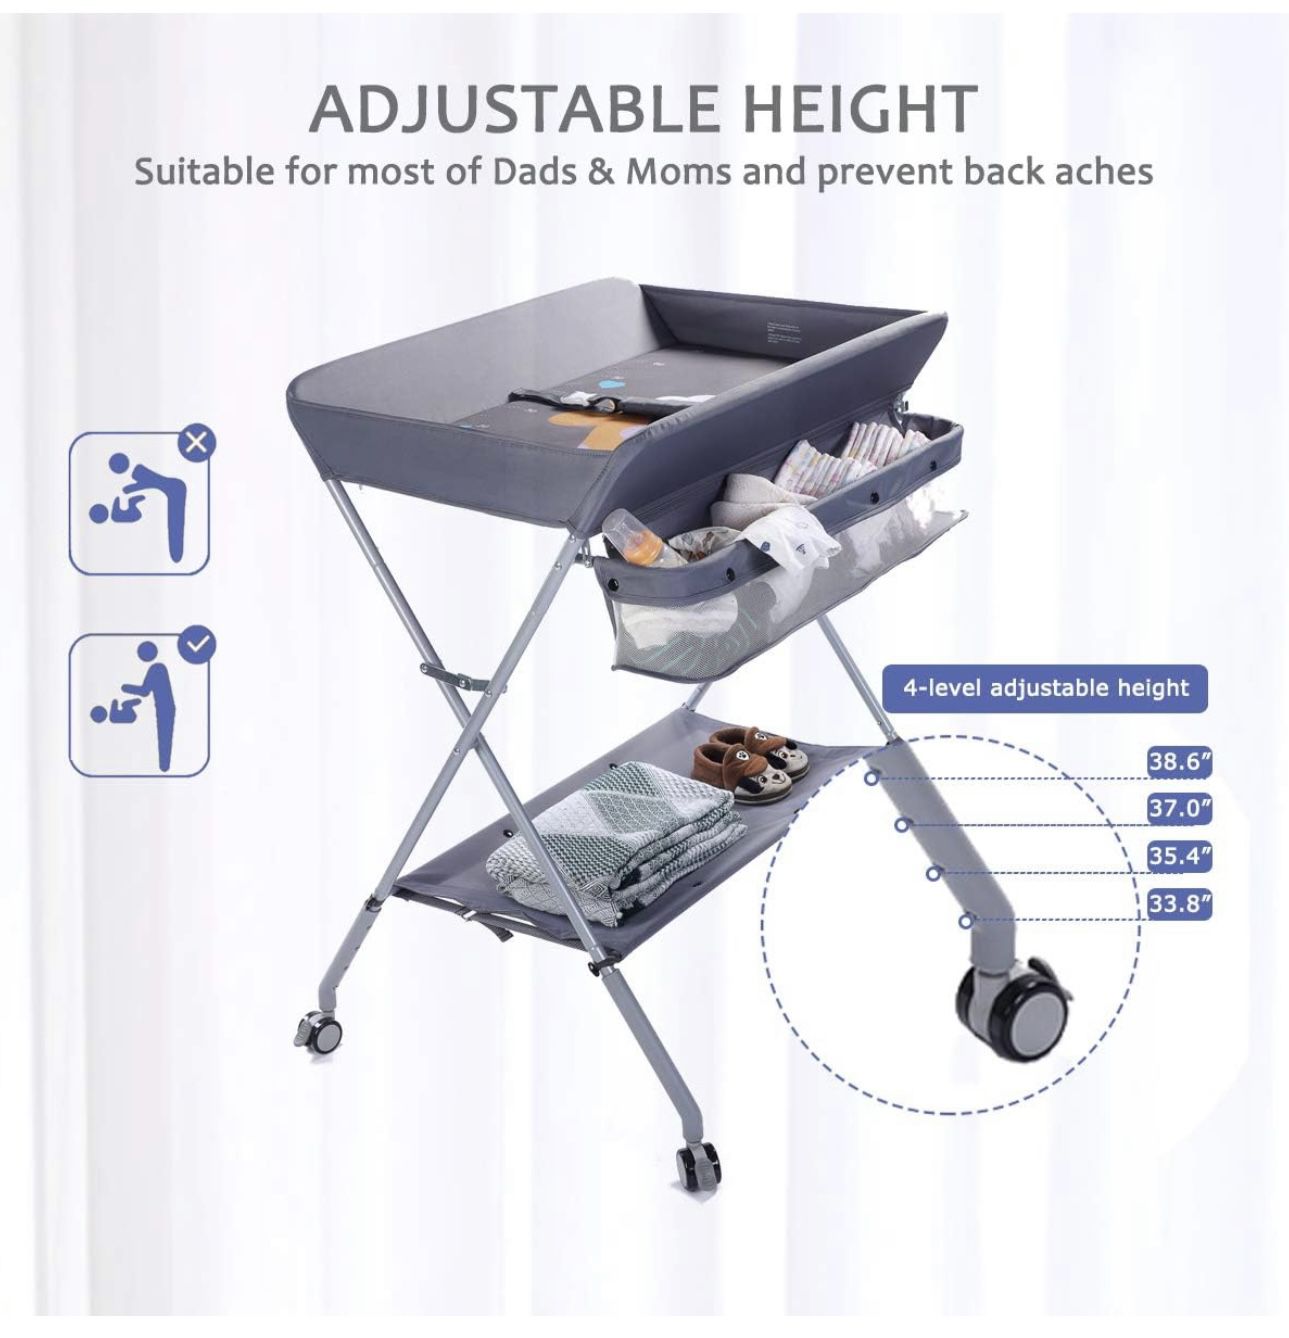 Babylicious Baby Portable Changing Table - Foldable Changing Table with Wheels - Portable Diaper Changing Station - Adjustable Height Baby Changing Ta